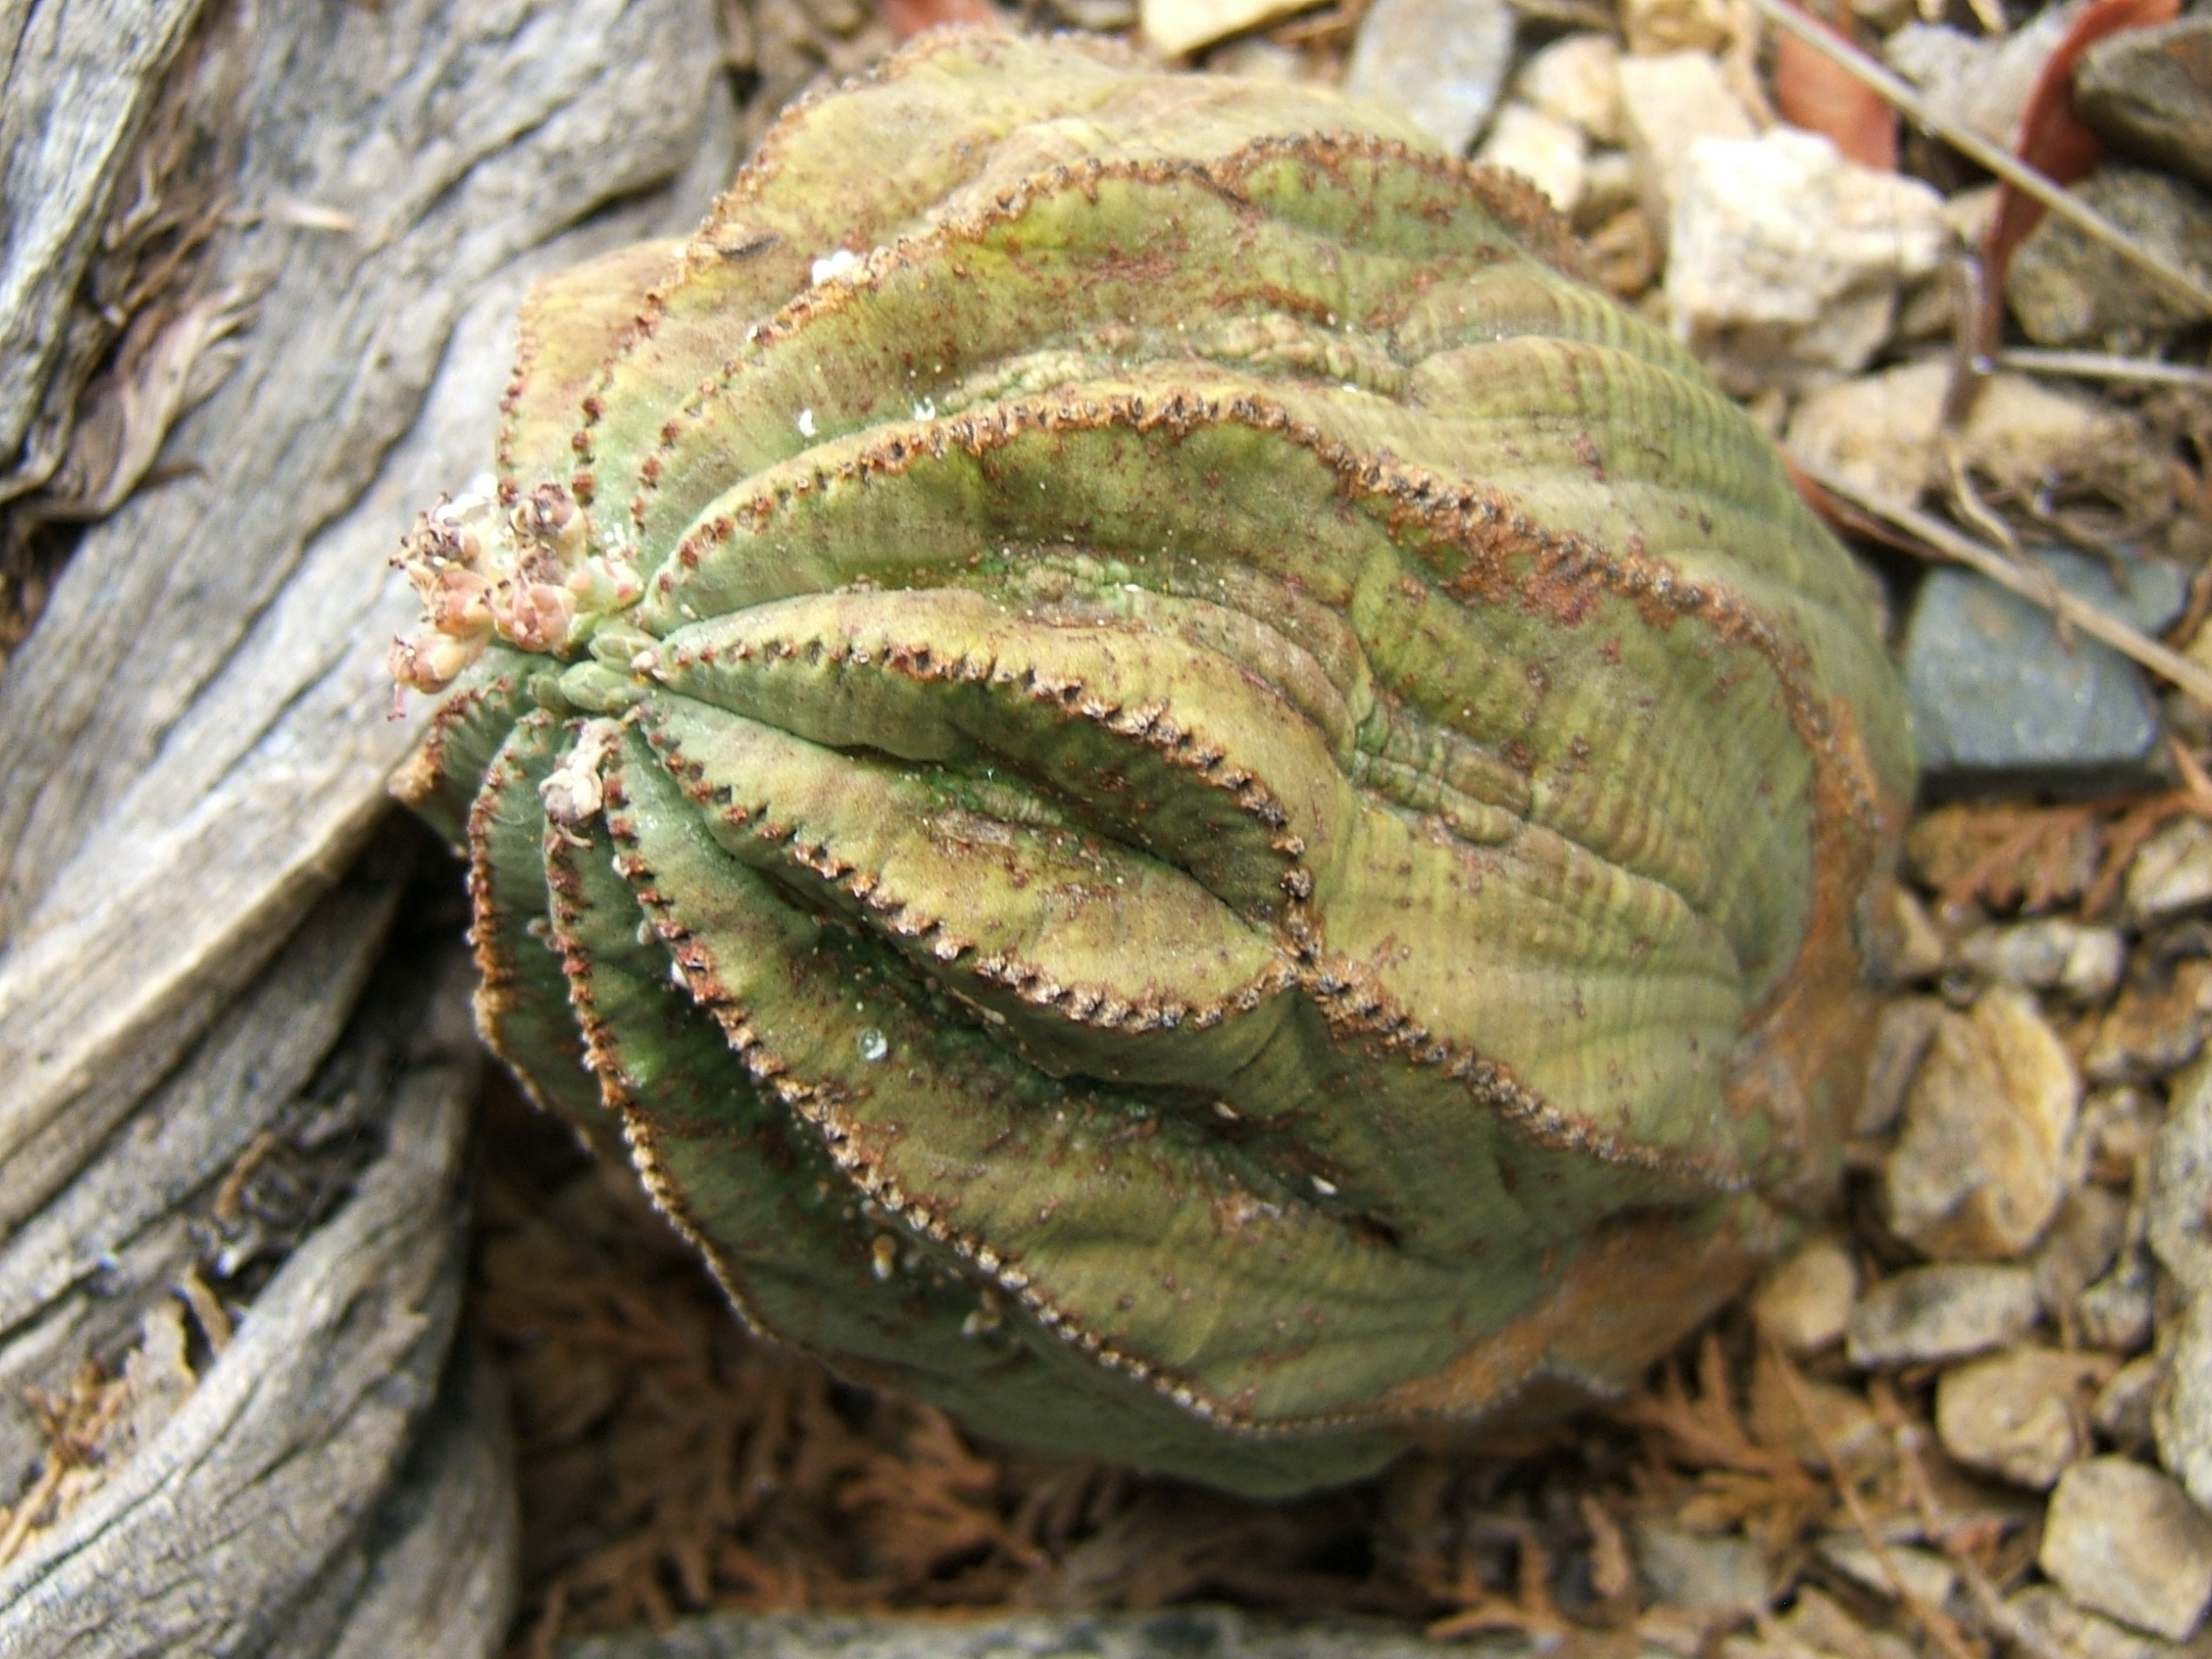 green and brown cactus